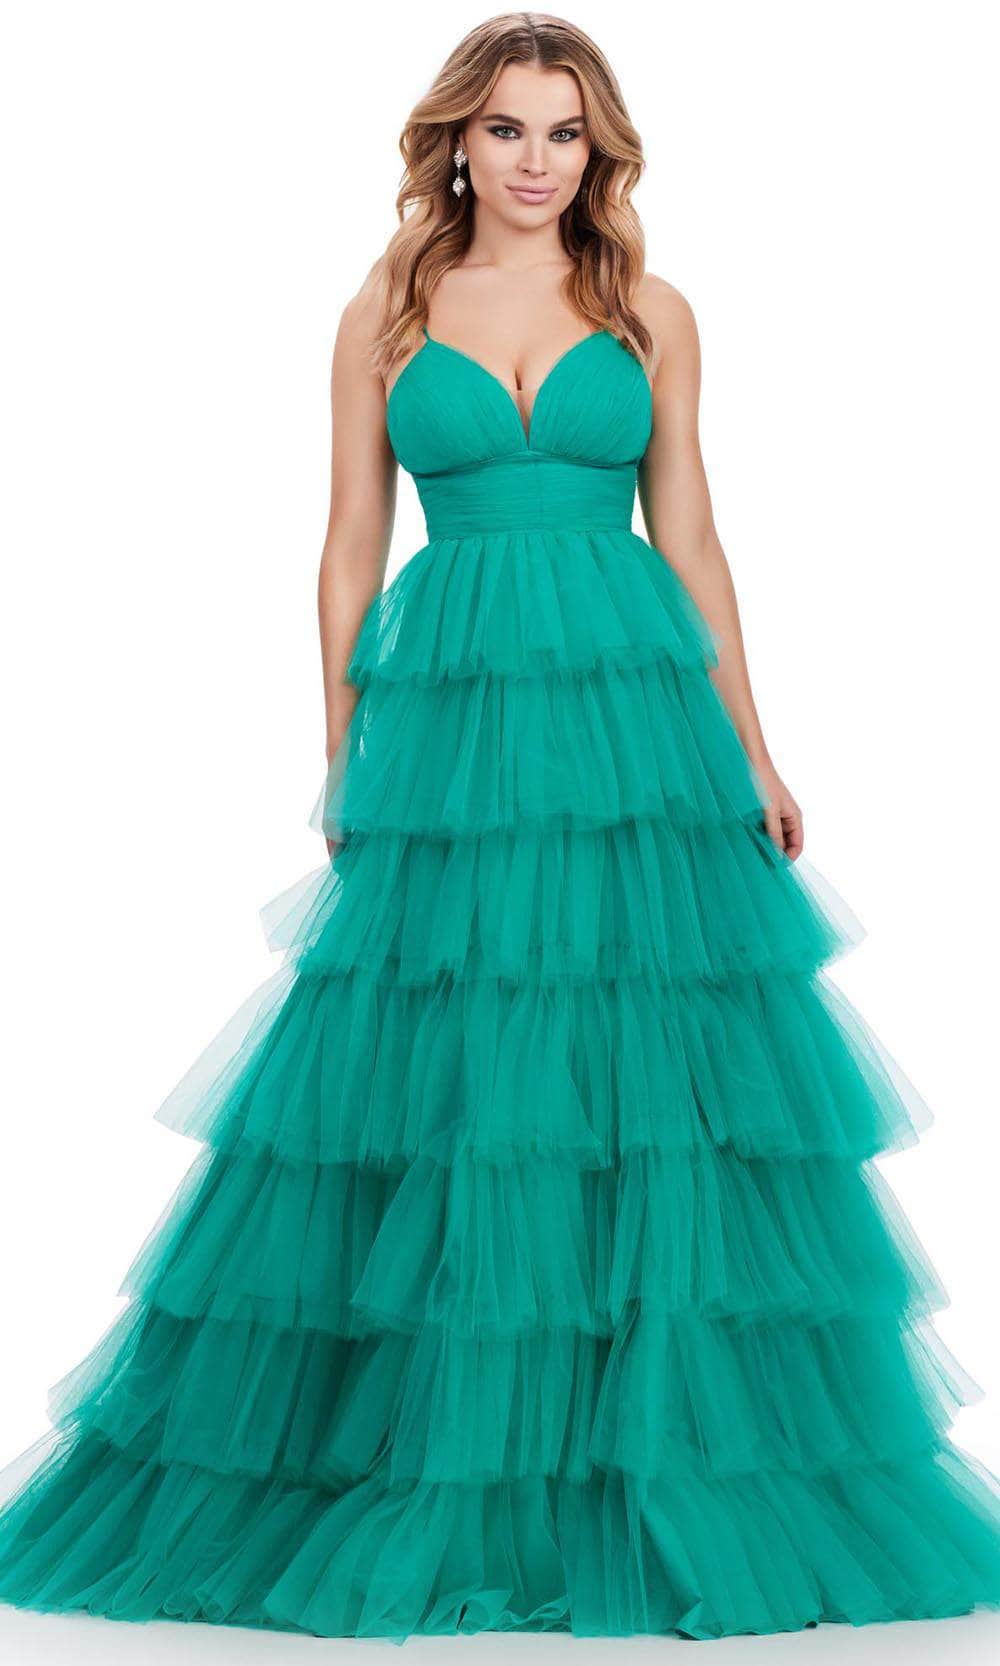 Image of Ashley Lauren 11622 - Tiered Tulle Prom Dress